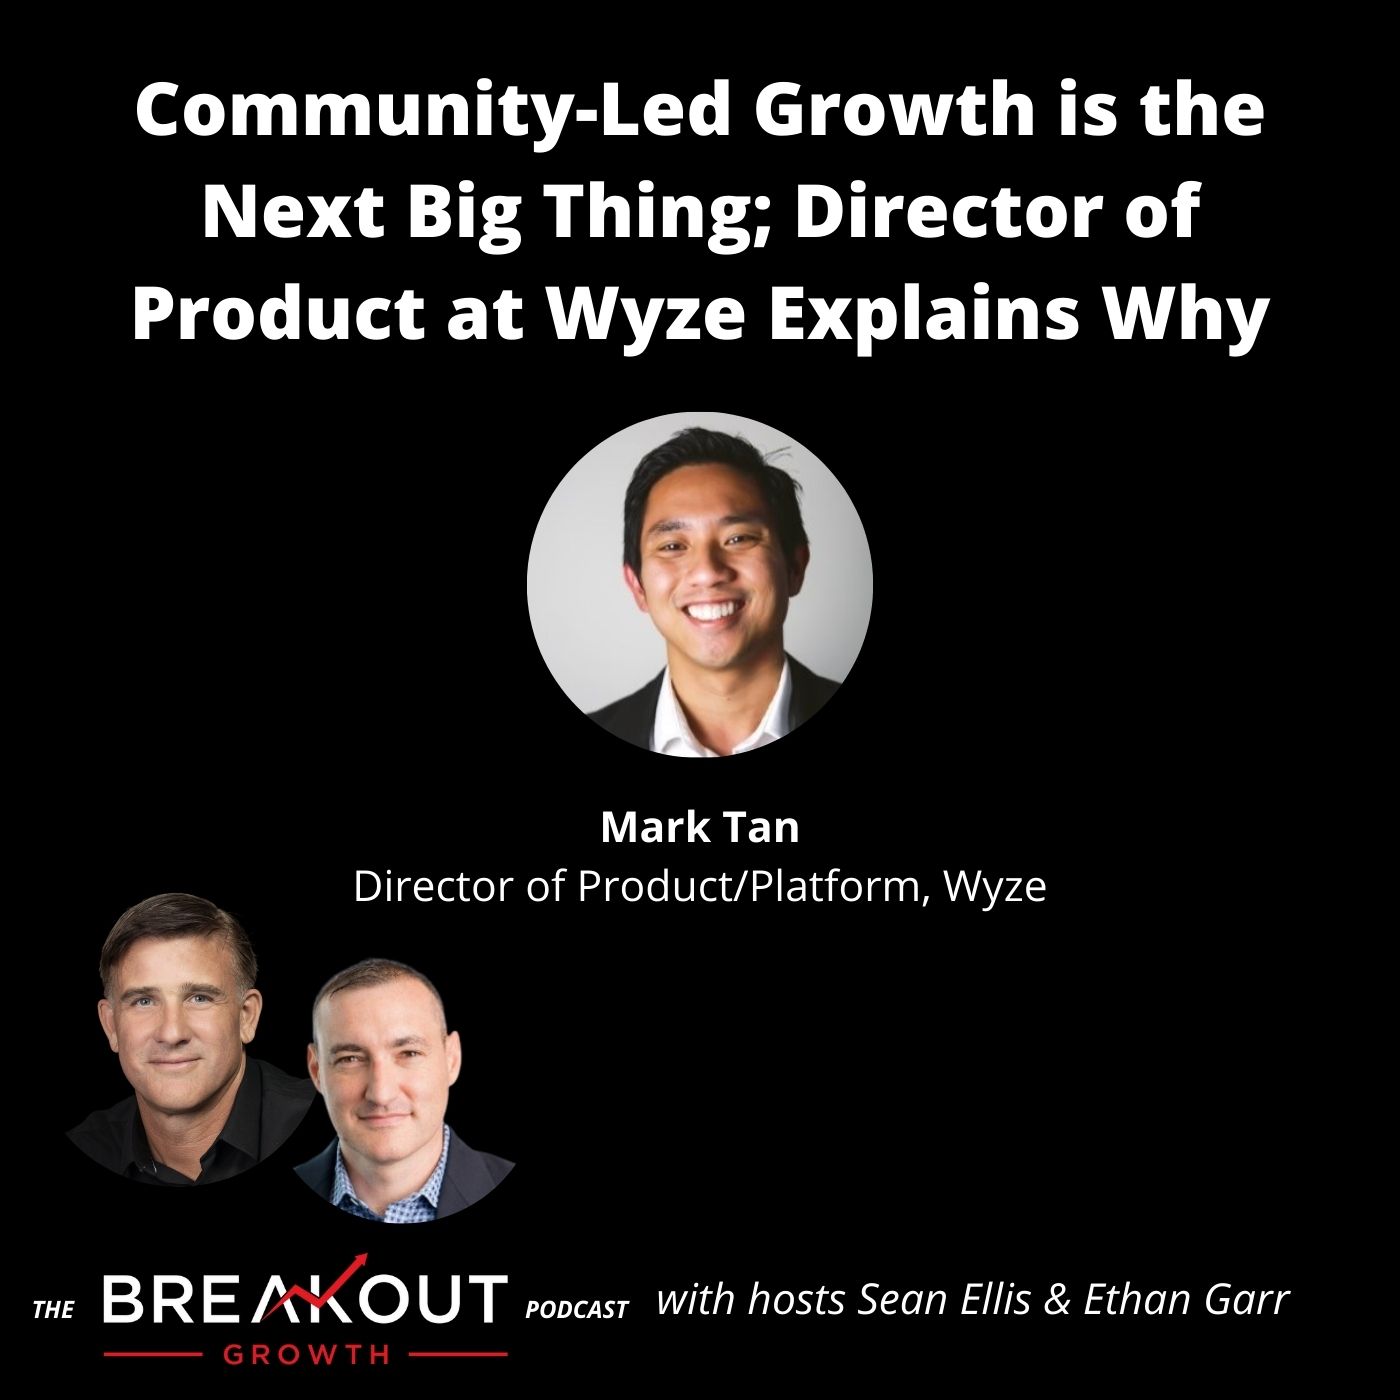 Community-Led Growth is the Next Big Thing; Director of Product at Wyze Explains Why